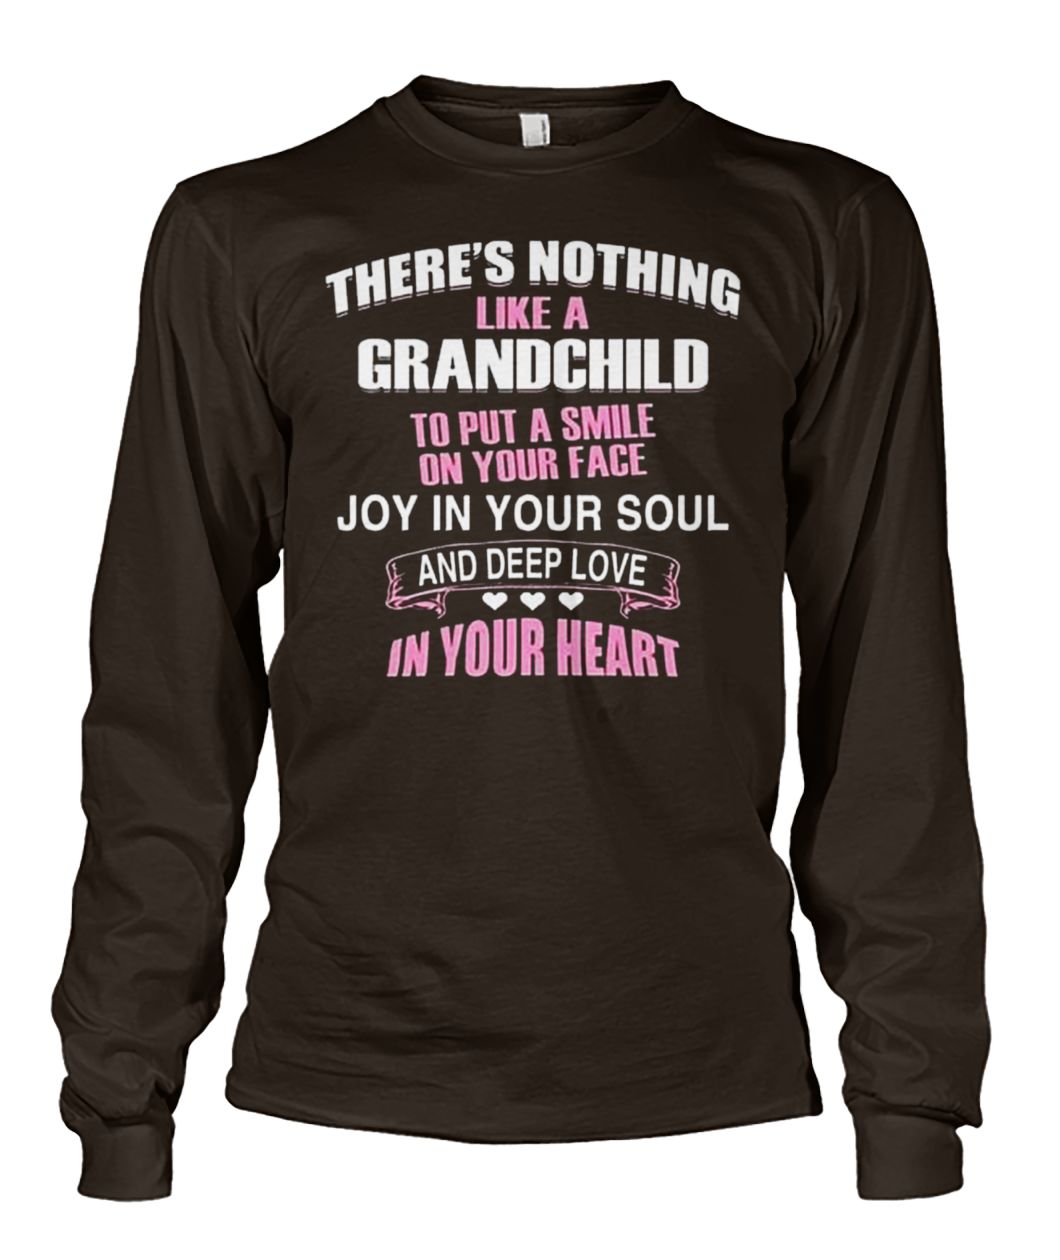 There's nothing like a grandchild to put a smile on your face unisex long sleeve